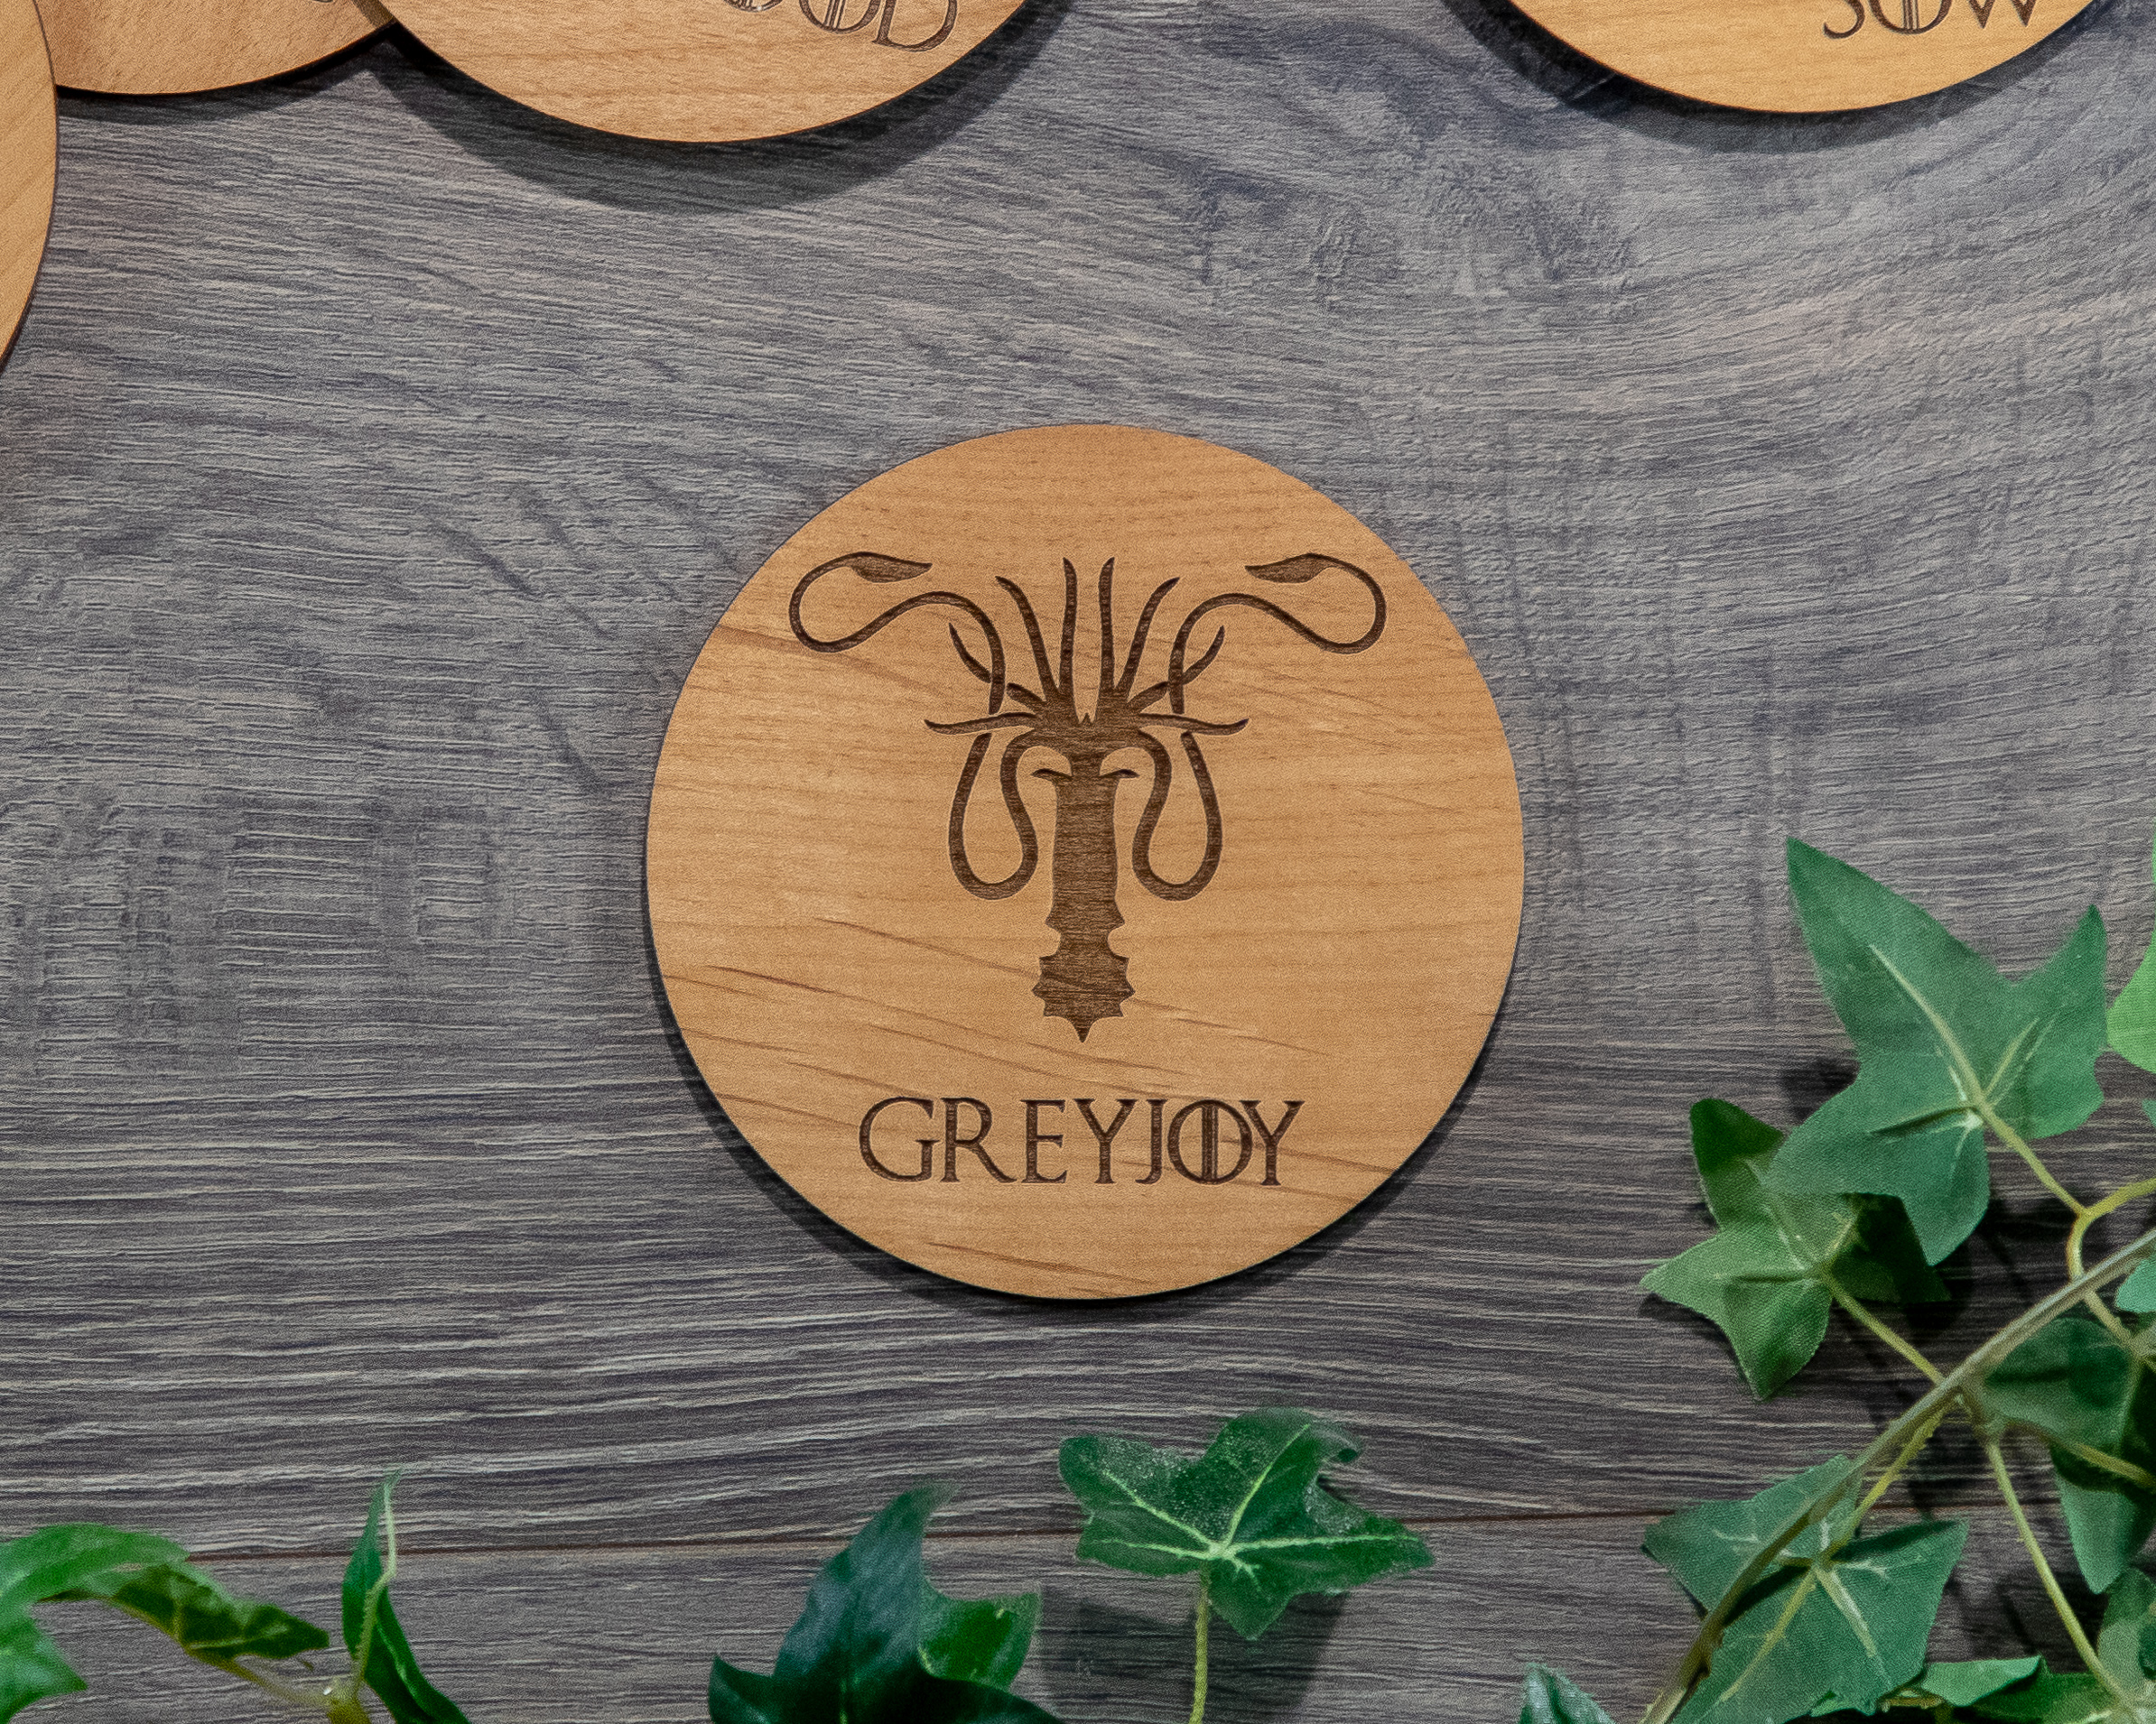 House Greyjoy Game of Thrones Wooden Coasters with House Sigil